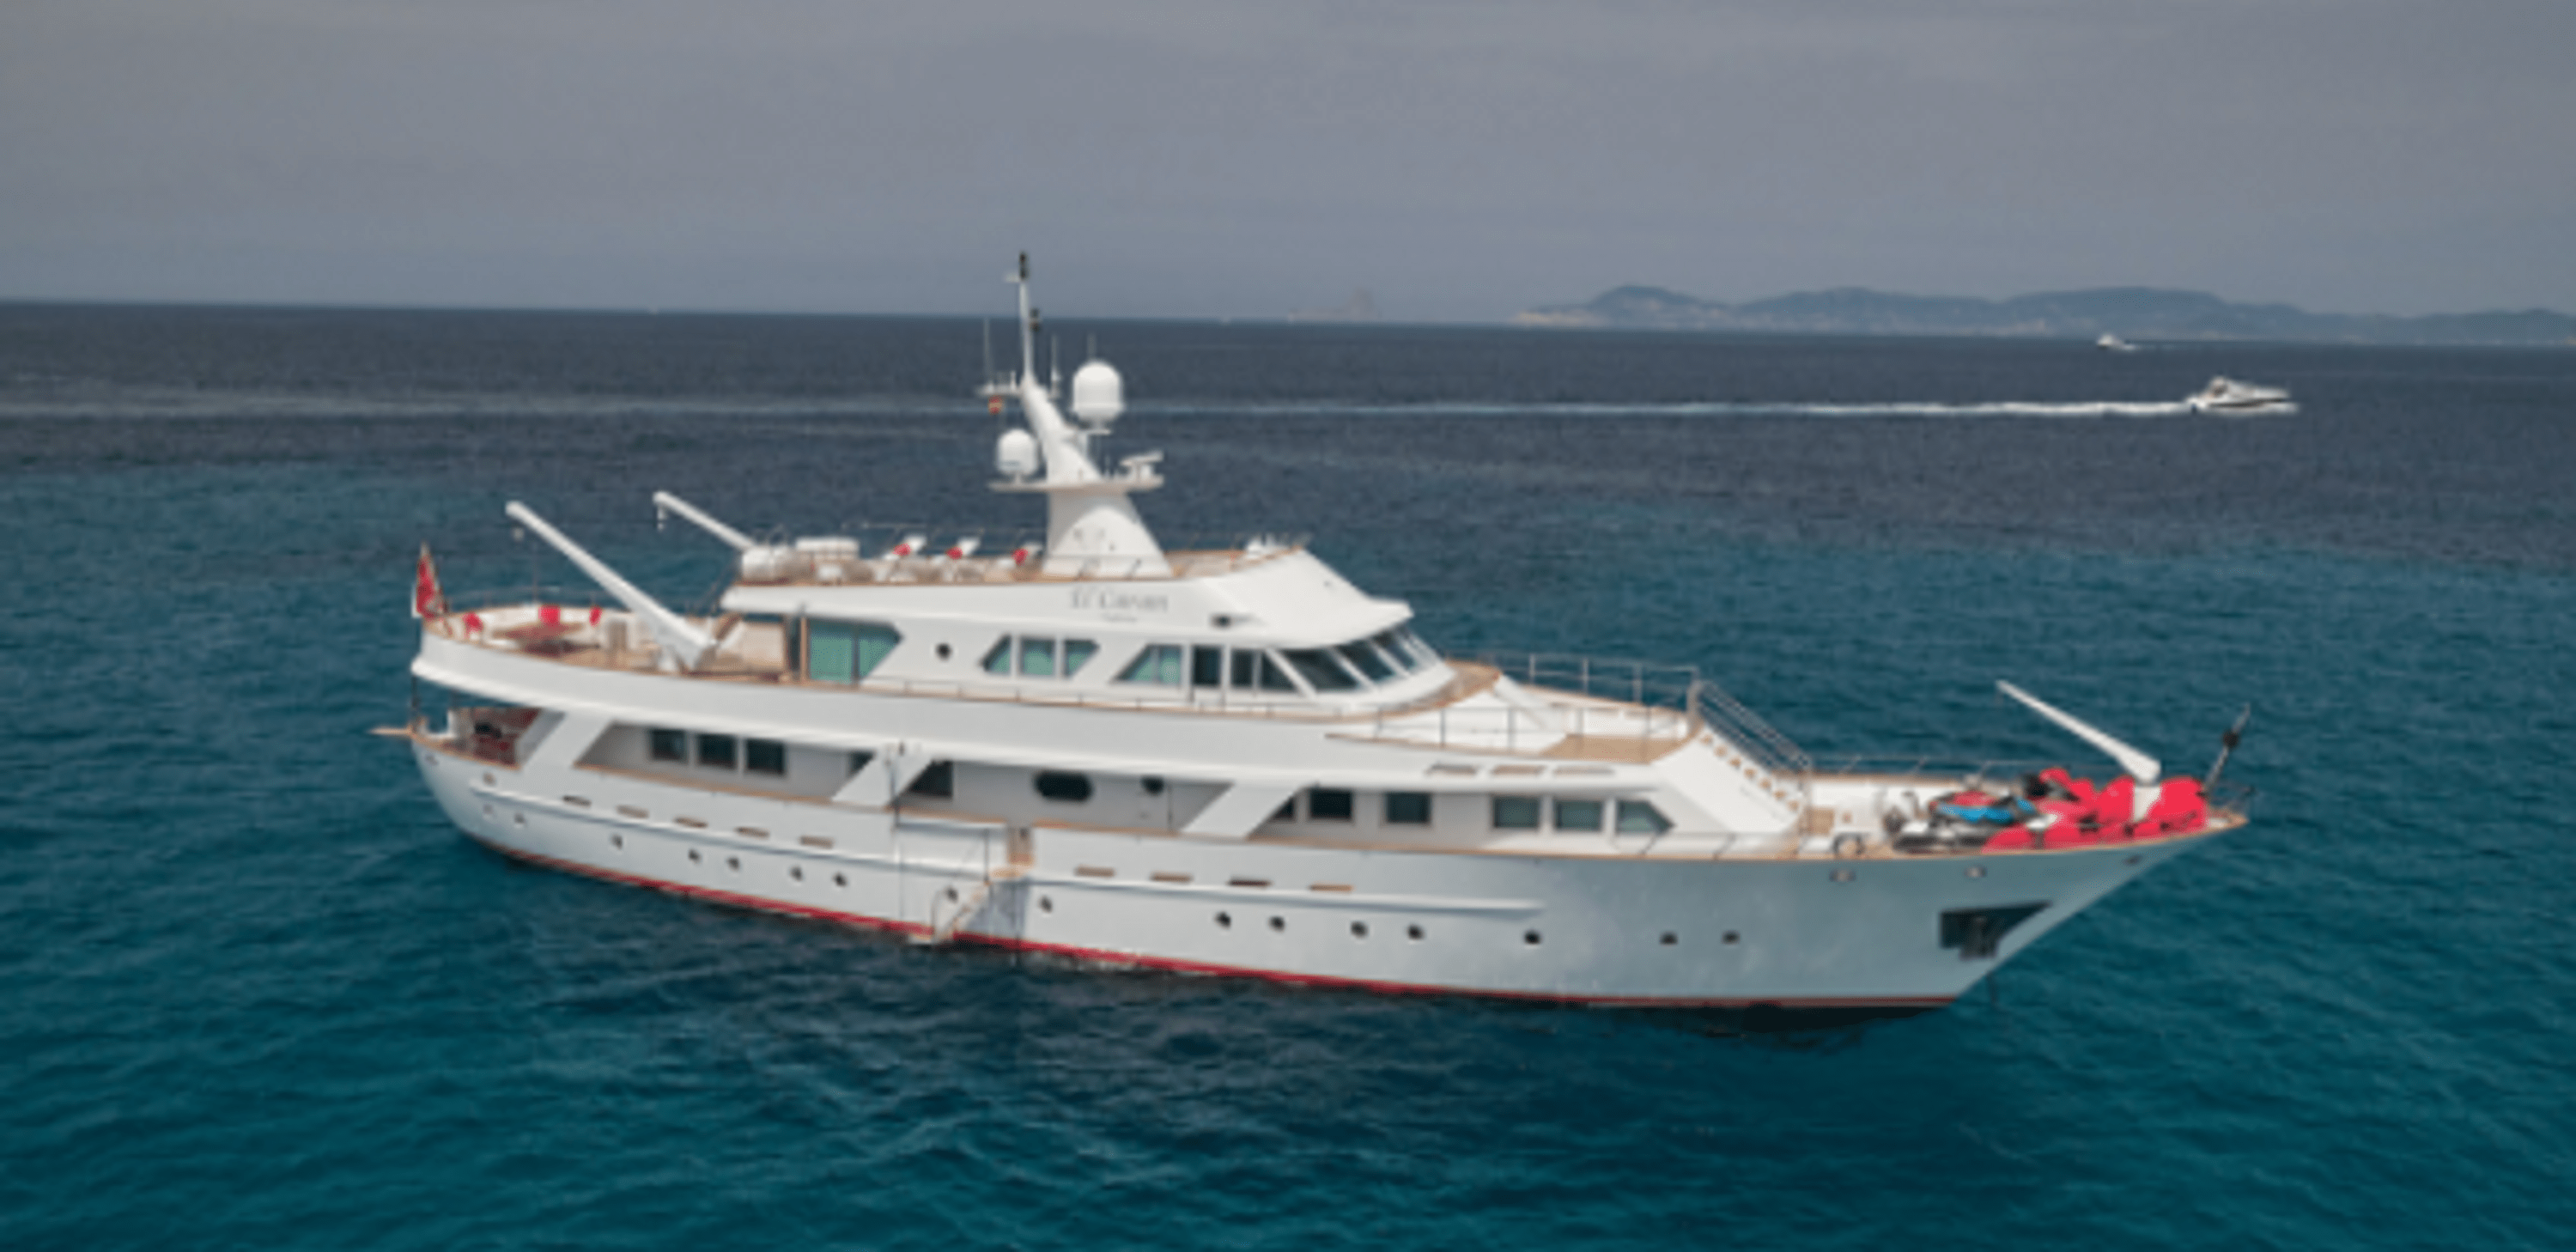 david-bowies-megayacht-is-on-sale-for-5-17-million